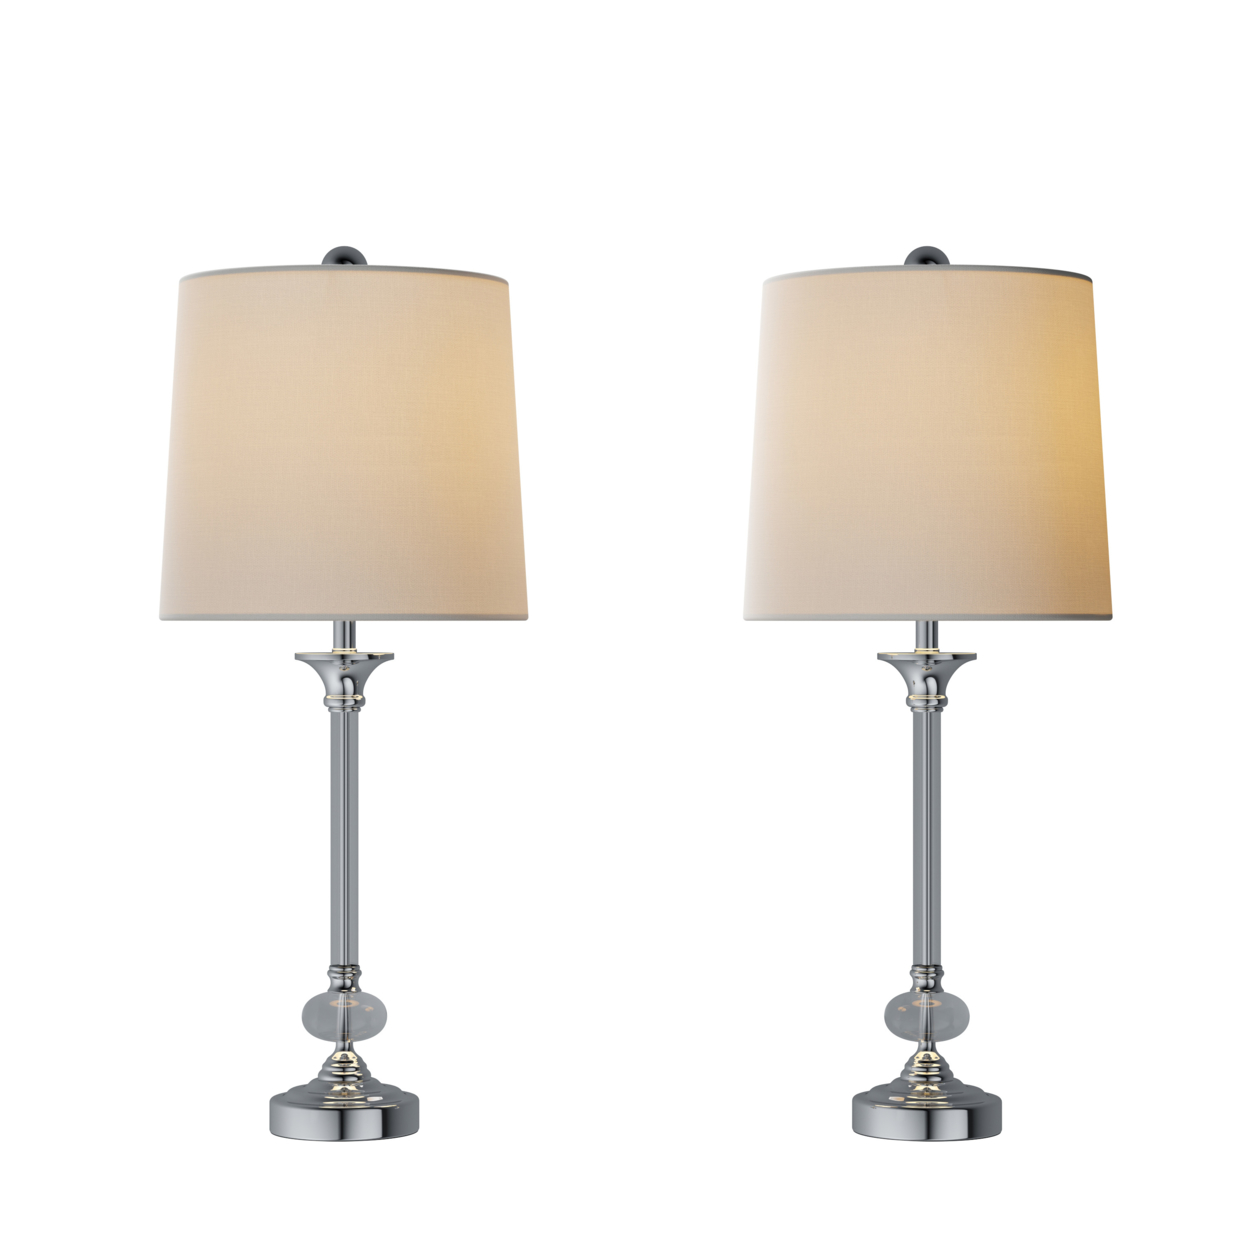 Crystal Lamps-Set Of 2 Faceted Shiny Silver Lighting-Comes With 2 Matching Table Lamps-Elegant, Modern Accent Lights